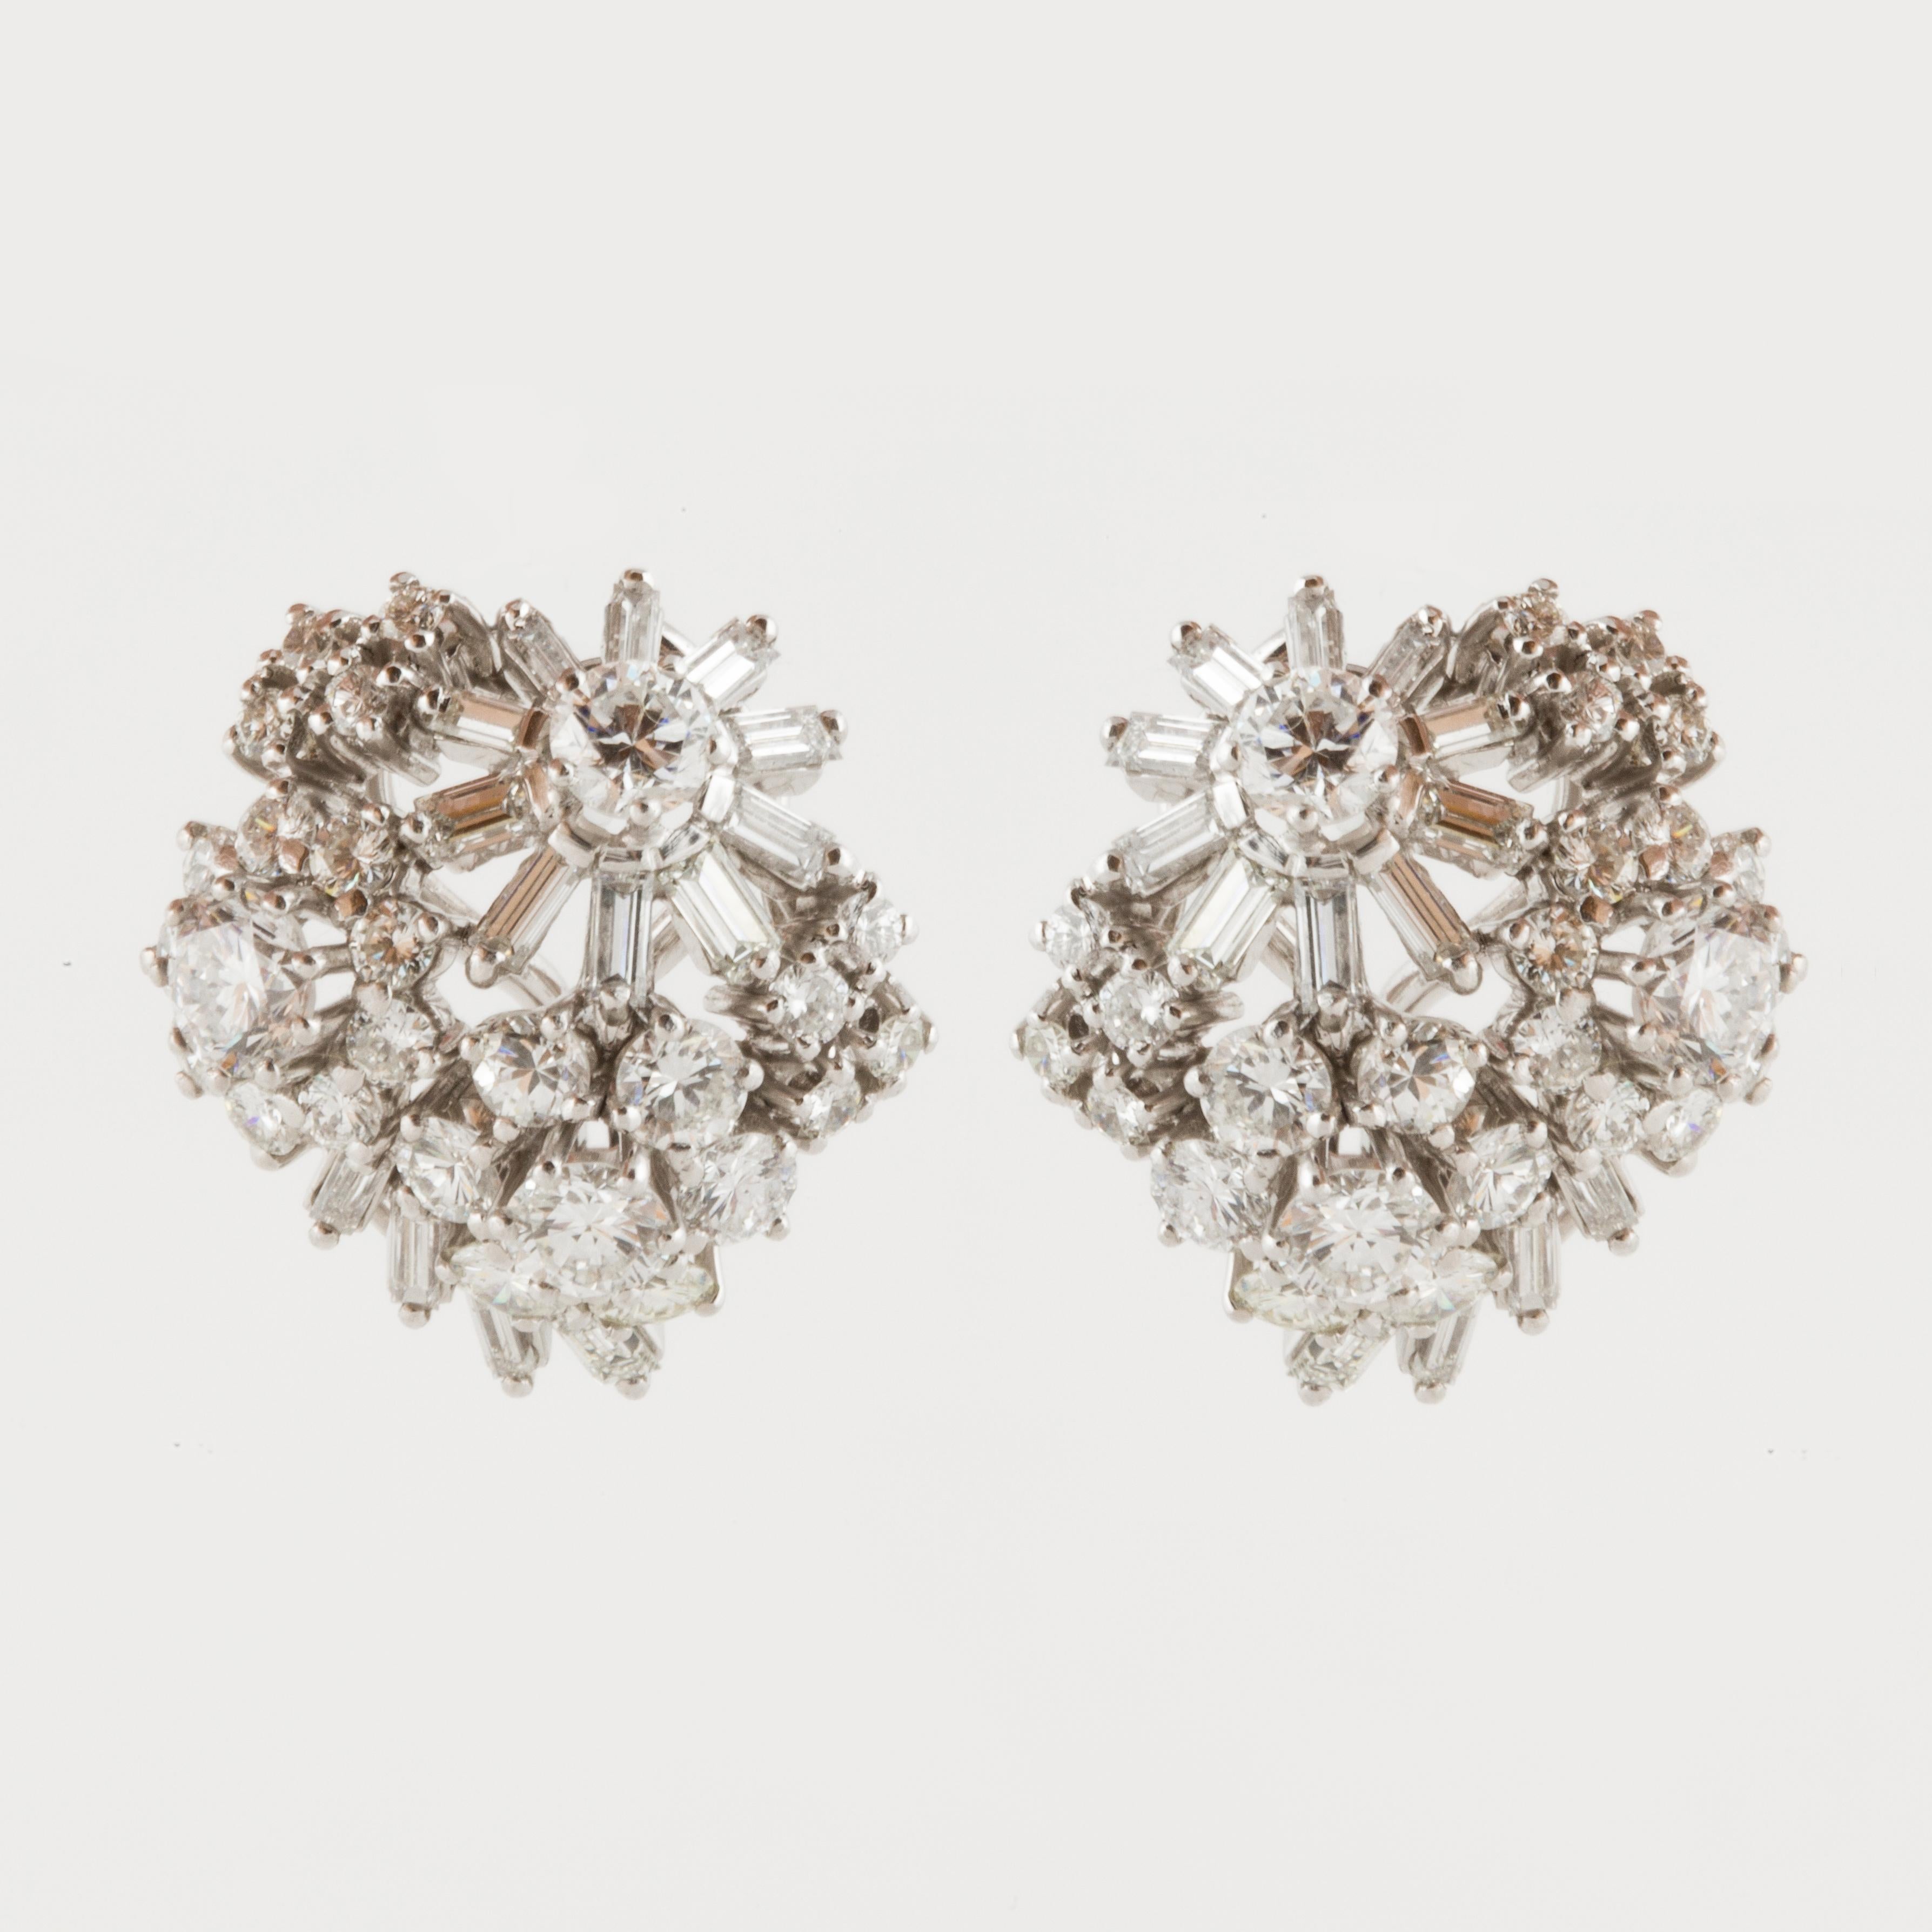 Mixed Cut 1950s Platinum Diamond Cluster Earrings For Sale